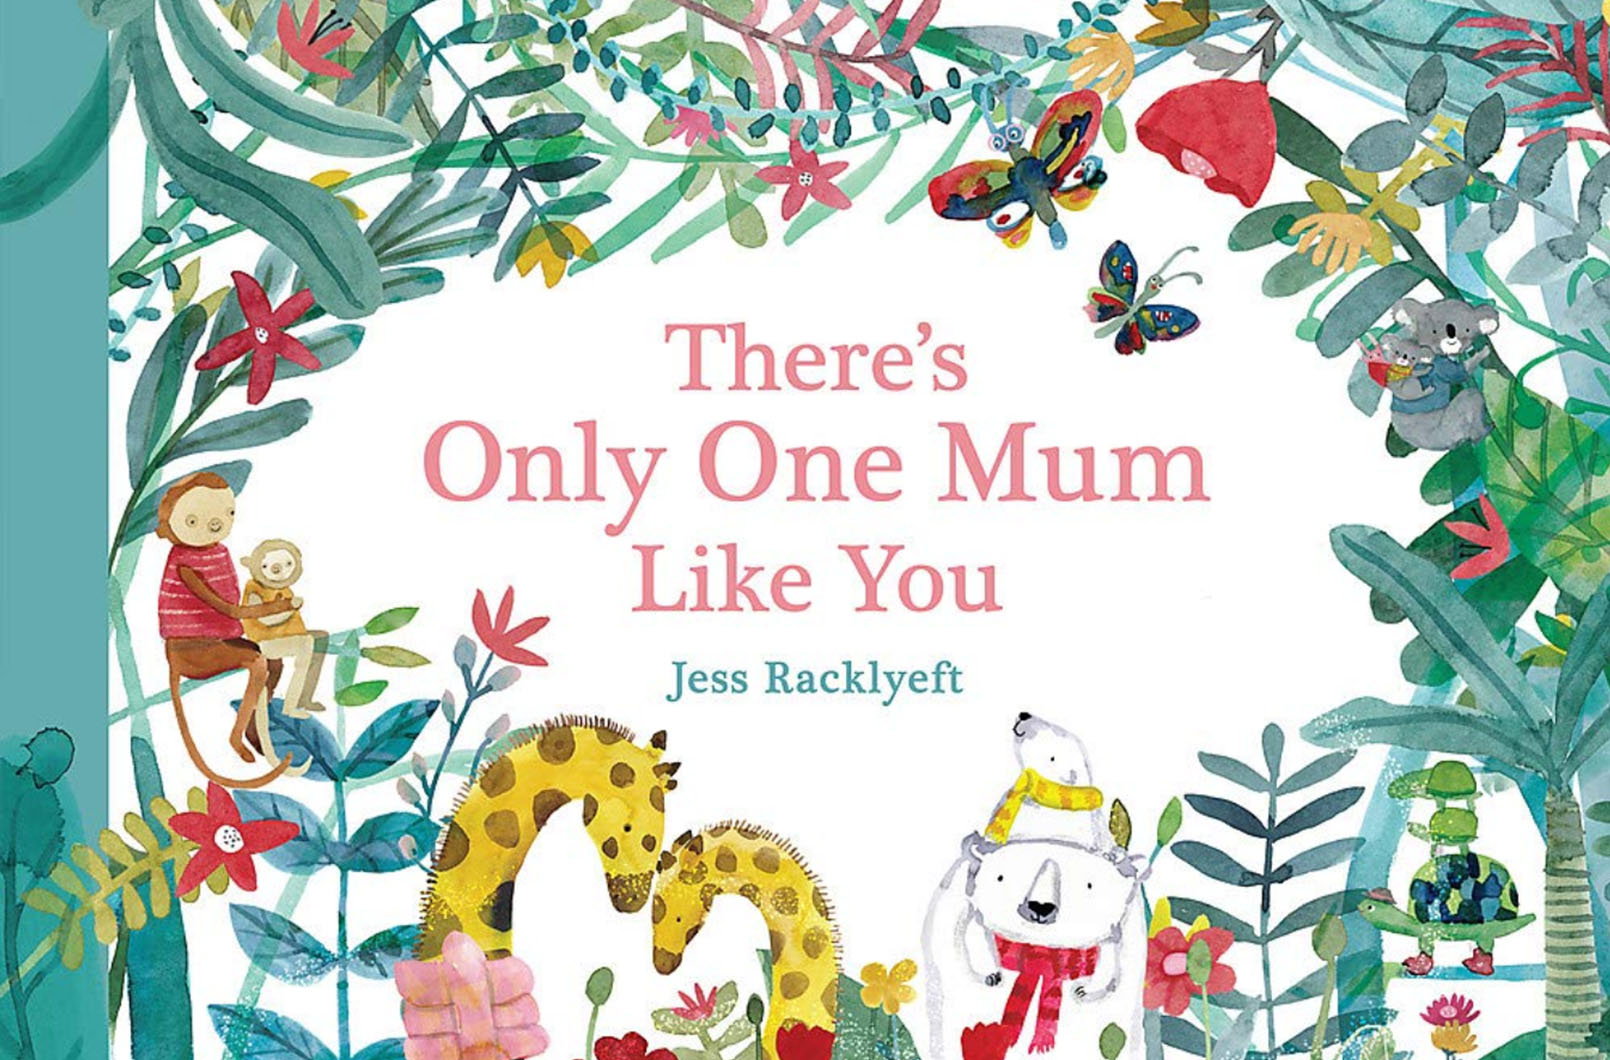 There's Only One Mum Like You by Jess Rackleyft